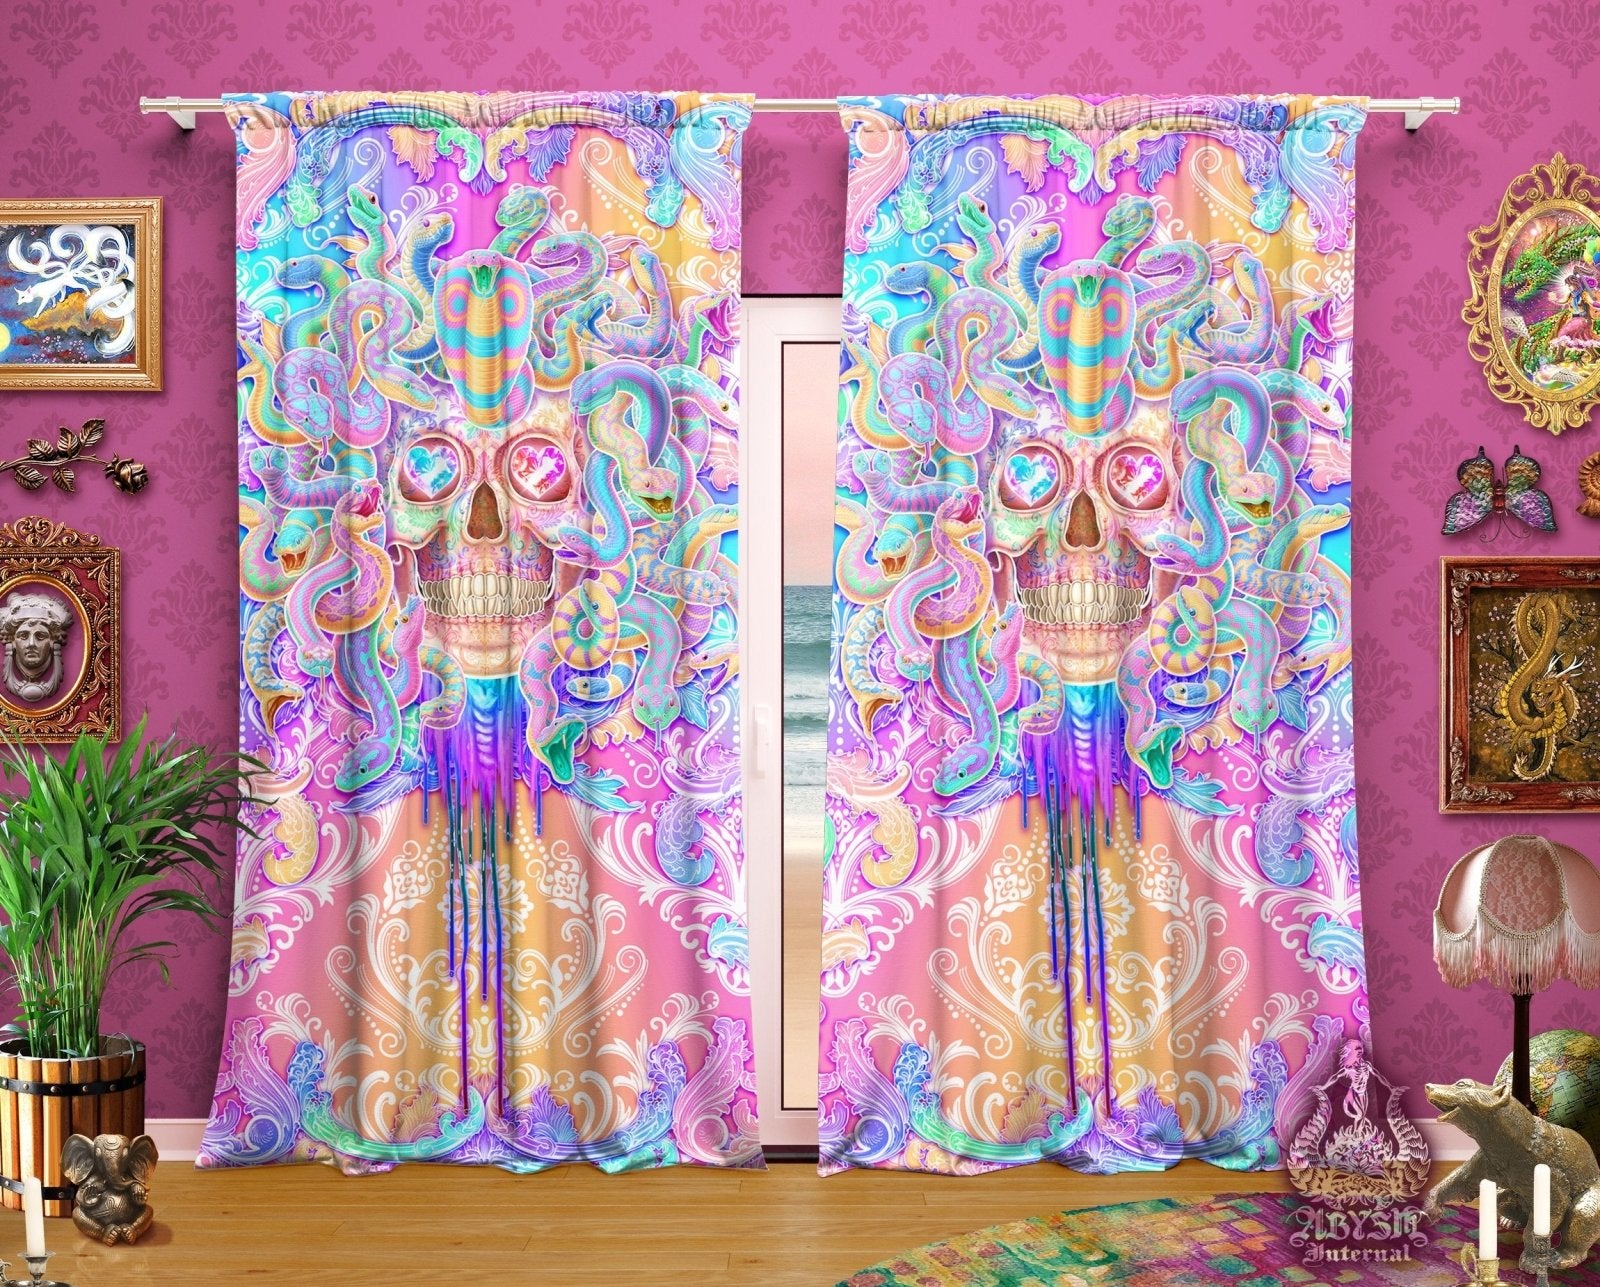 Aesthetic Blackout Curtains, Long Window Panels, Psychedelic Art Print, Kawaii Gamer Room Decor, Funky and Eclectic Home Decor - Pastel Medusa Skull & Snakes - Abysm Internal